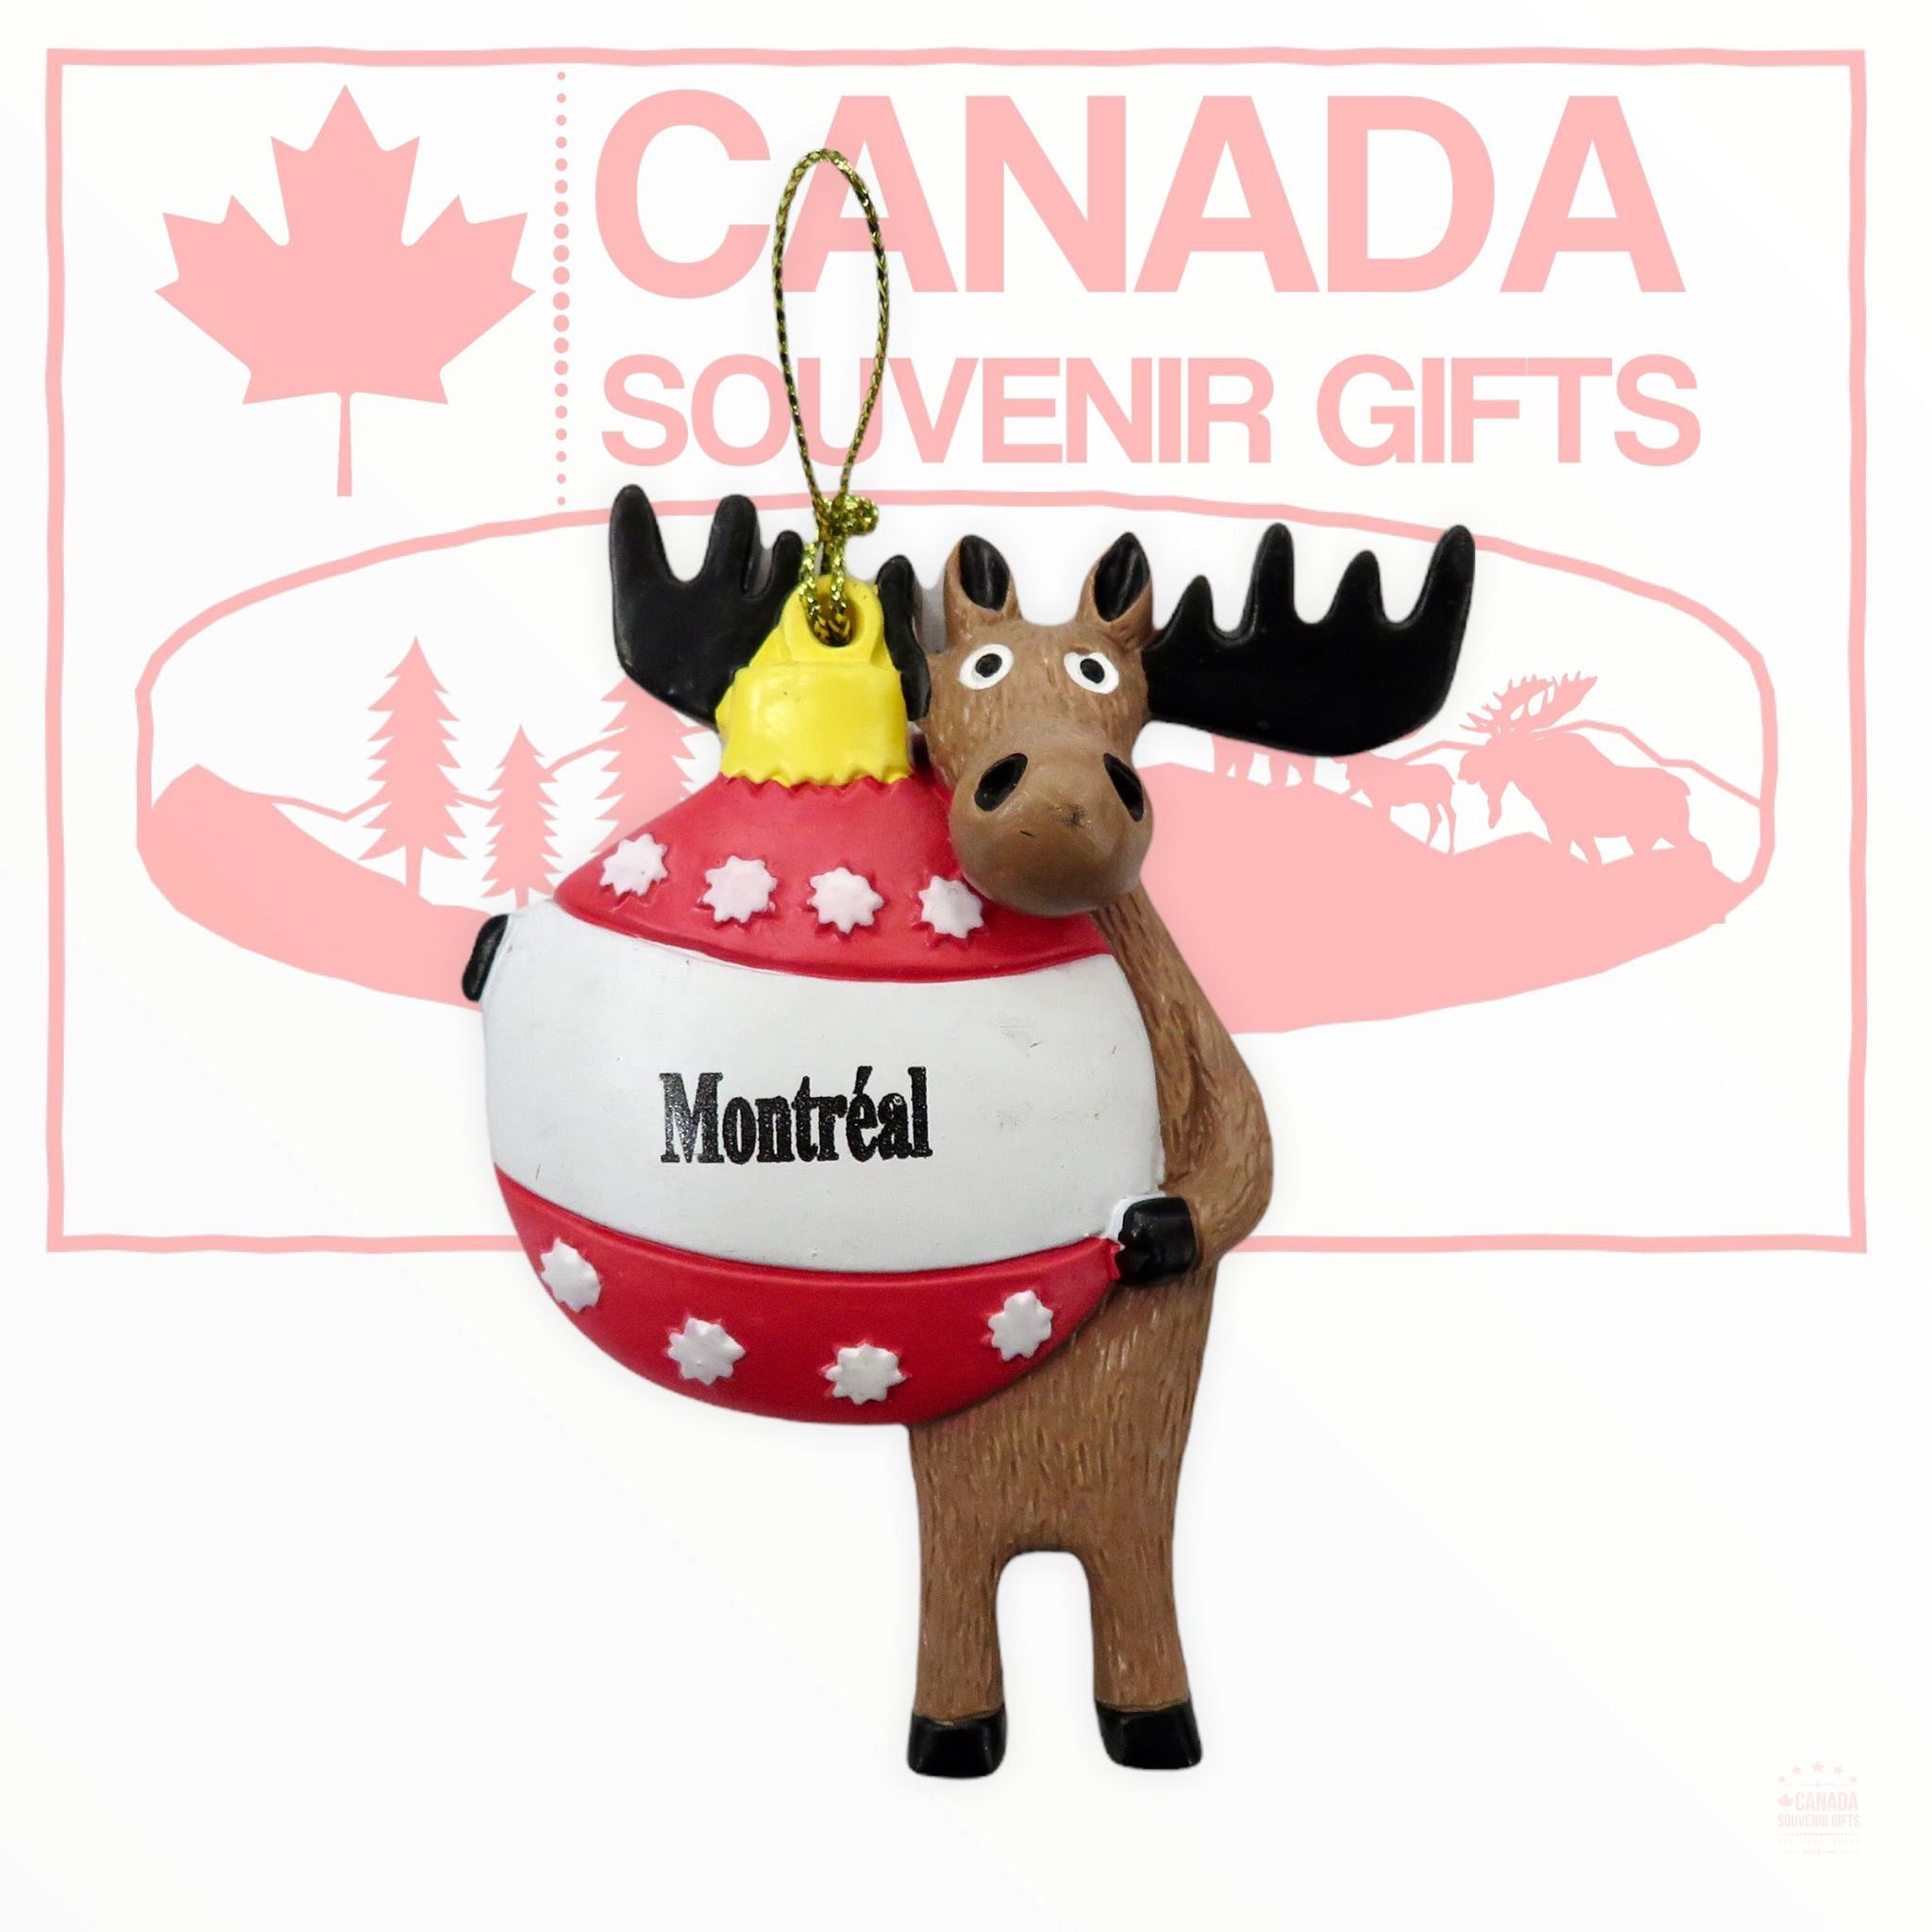 Montreal Holiday Ornaments - Moose with Montreal Ball Christmas Ornament Souvenir Gift